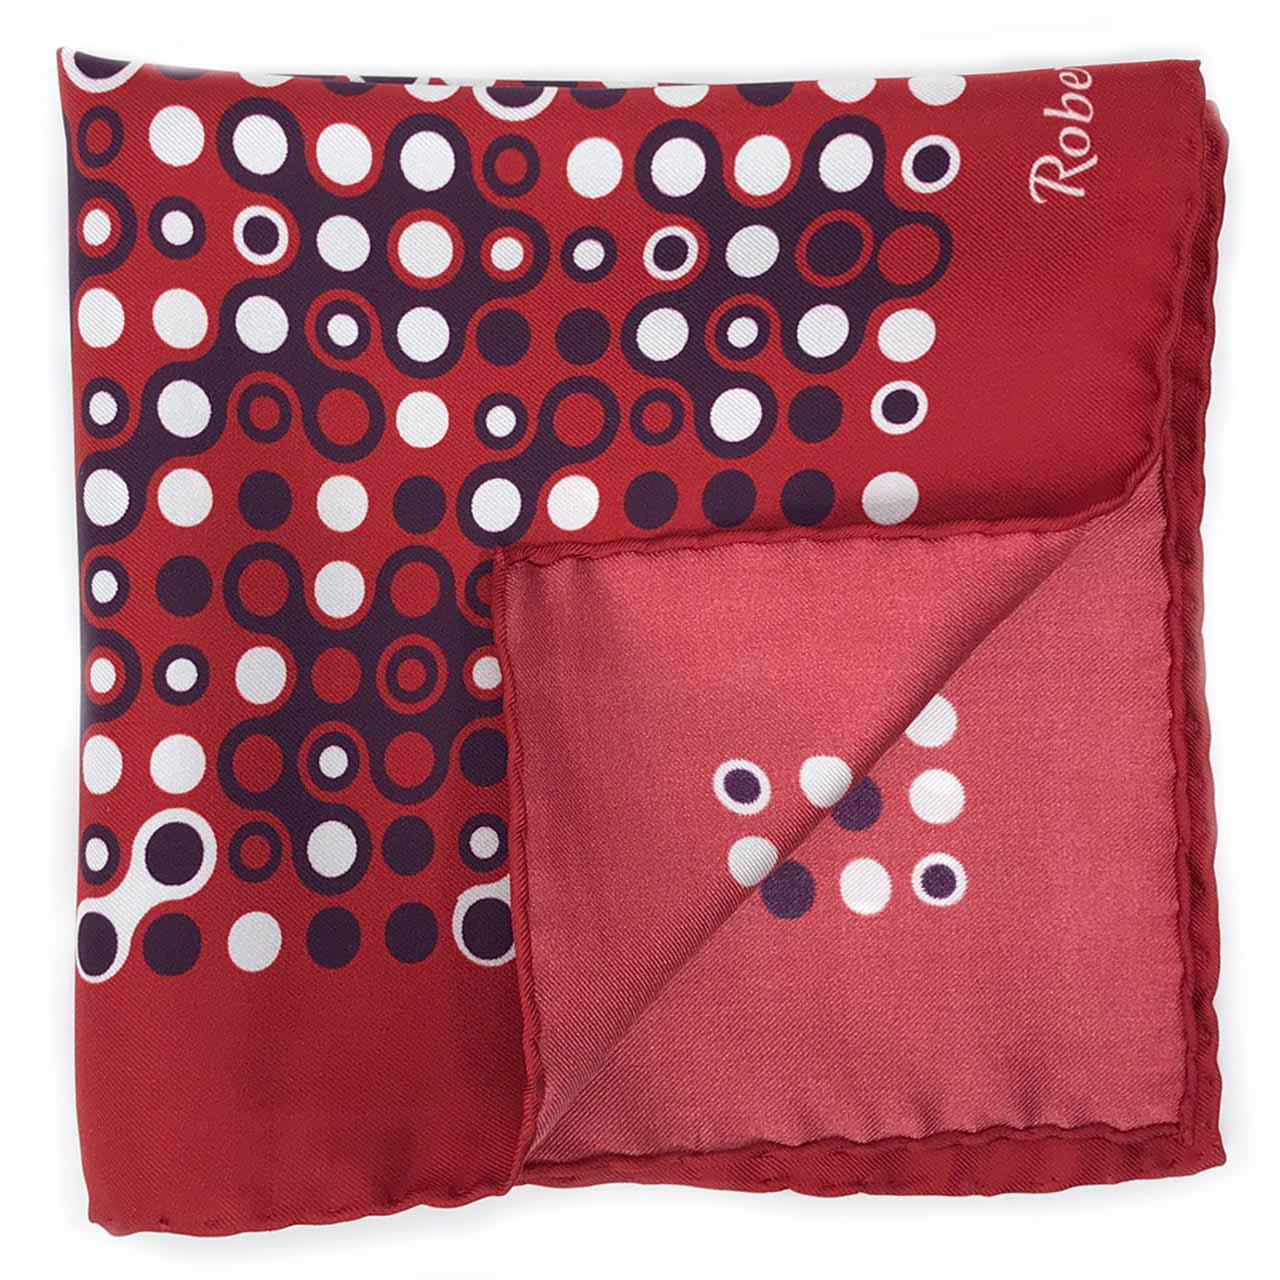 The Code Berry Red Pocket Square